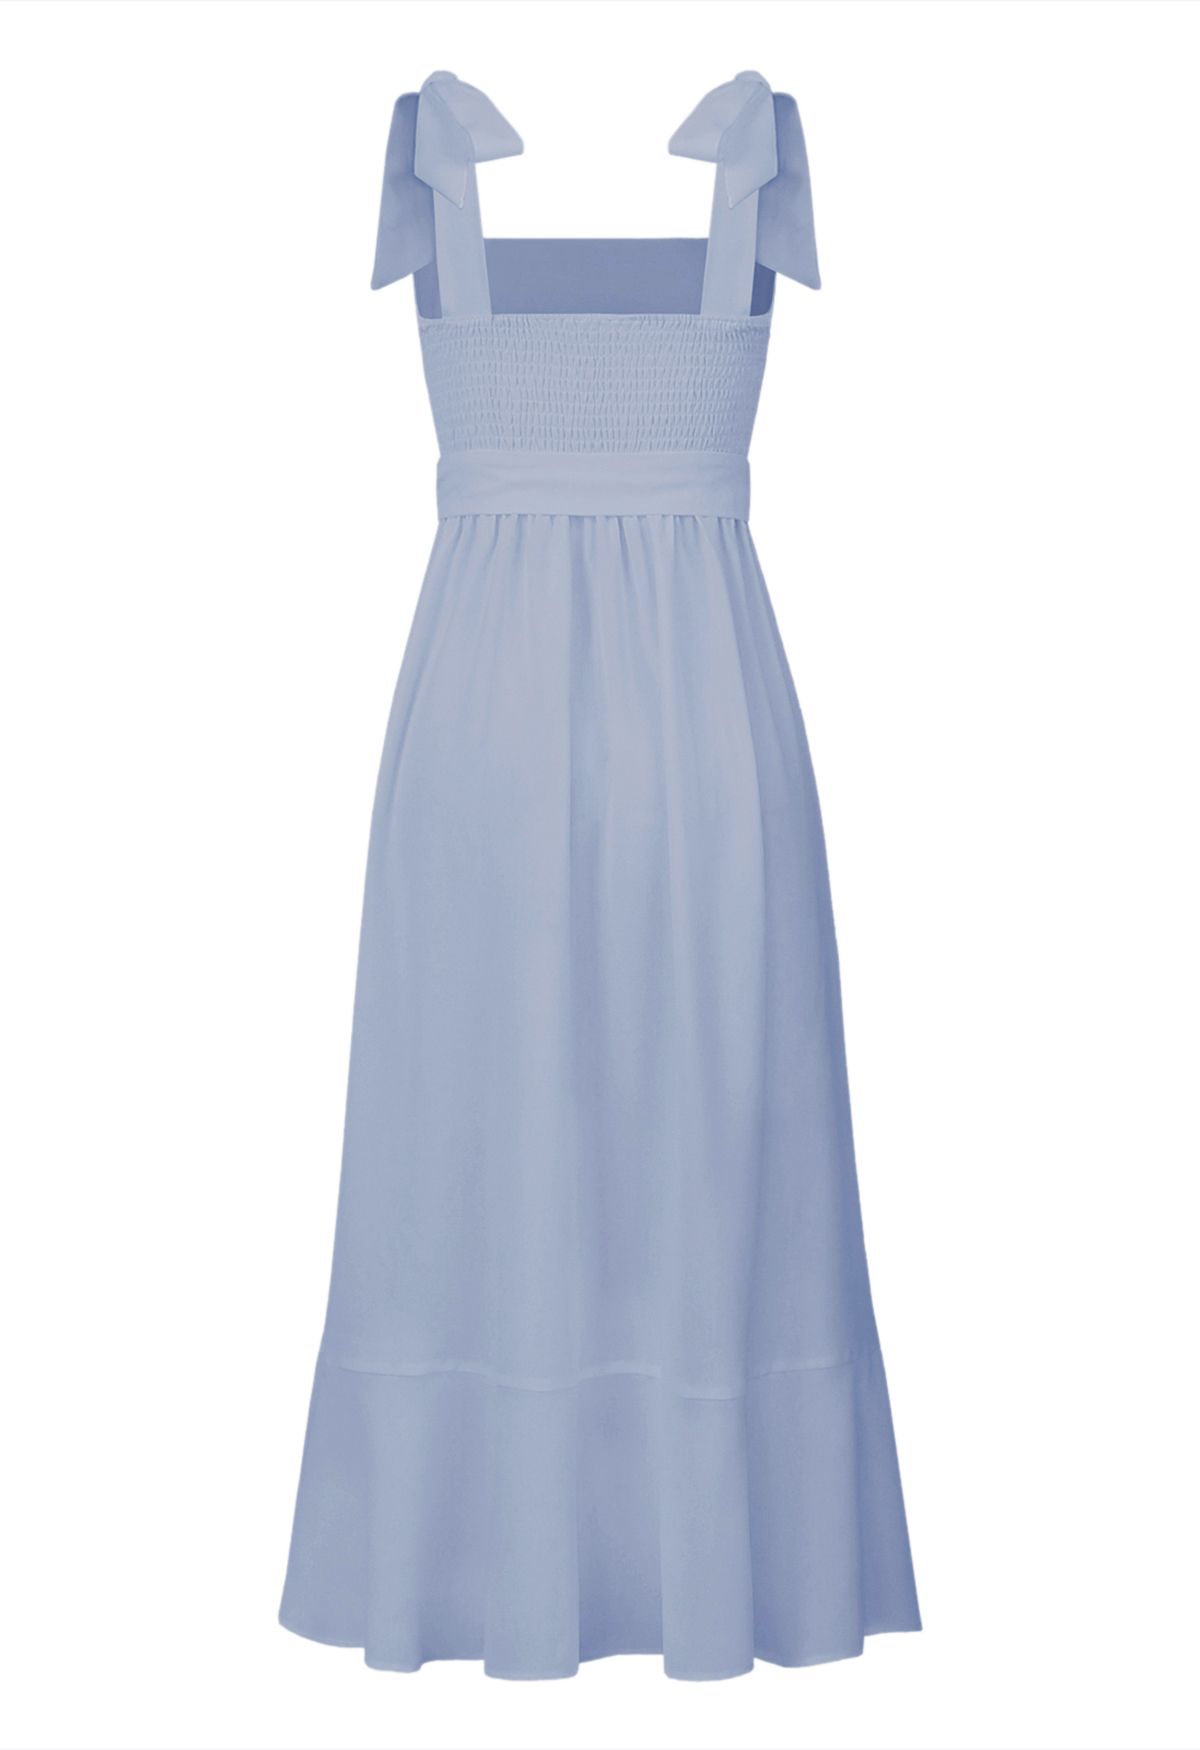 Ruffle Hem Tie-Shoulder Cami Dress in Dusty Blue - Retro, Indie and ...